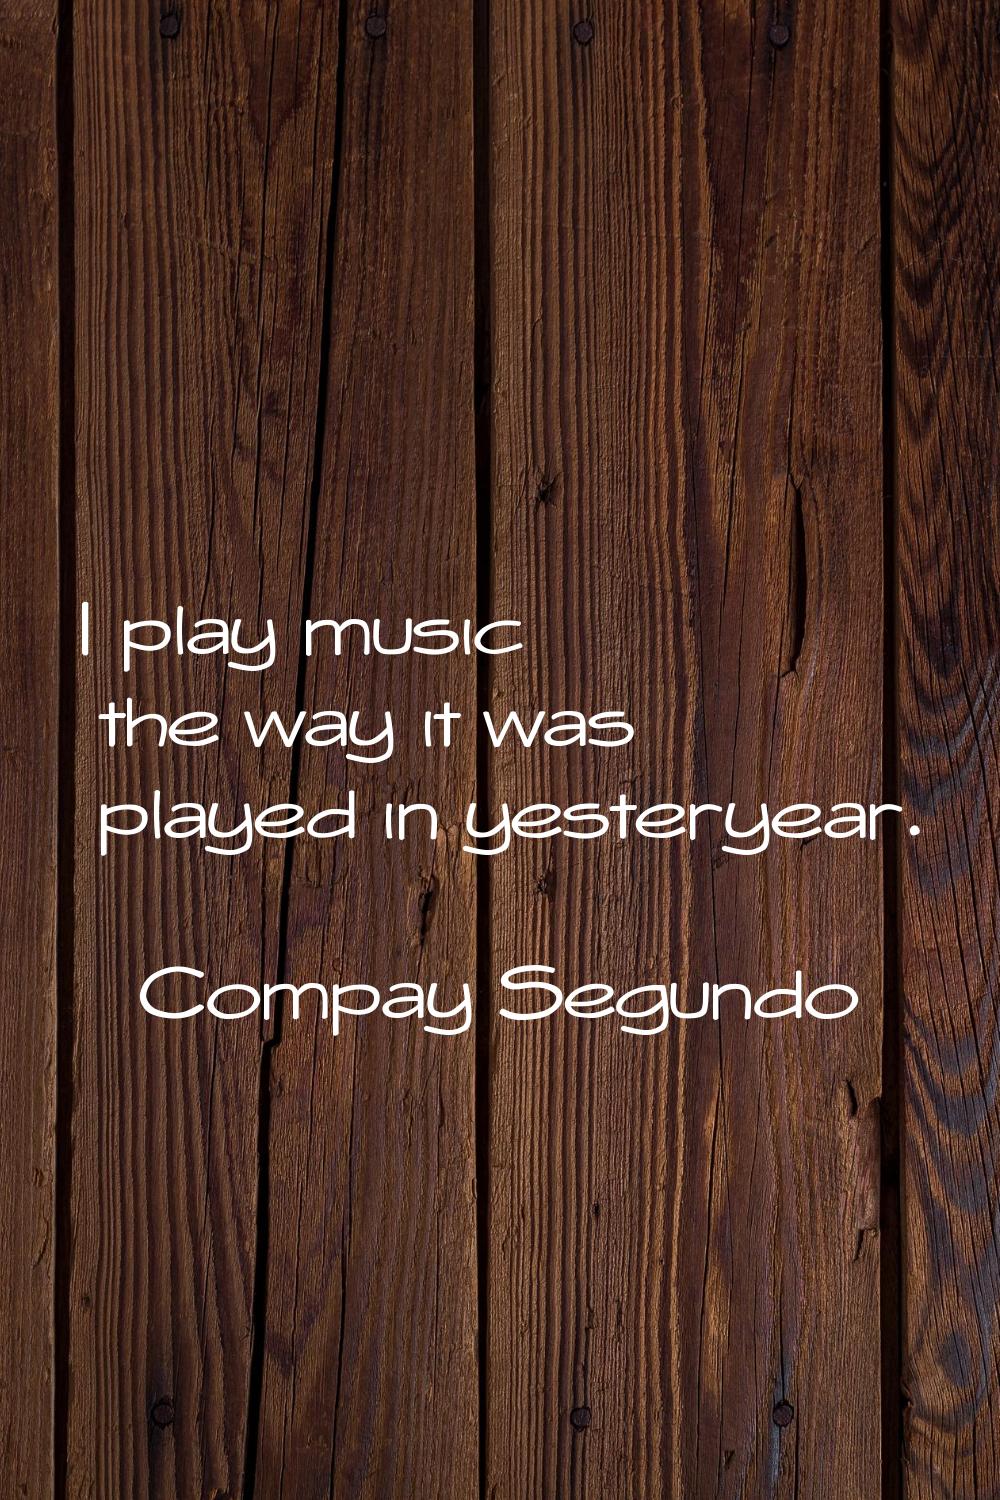 I play music the way it was played in yesteryear.